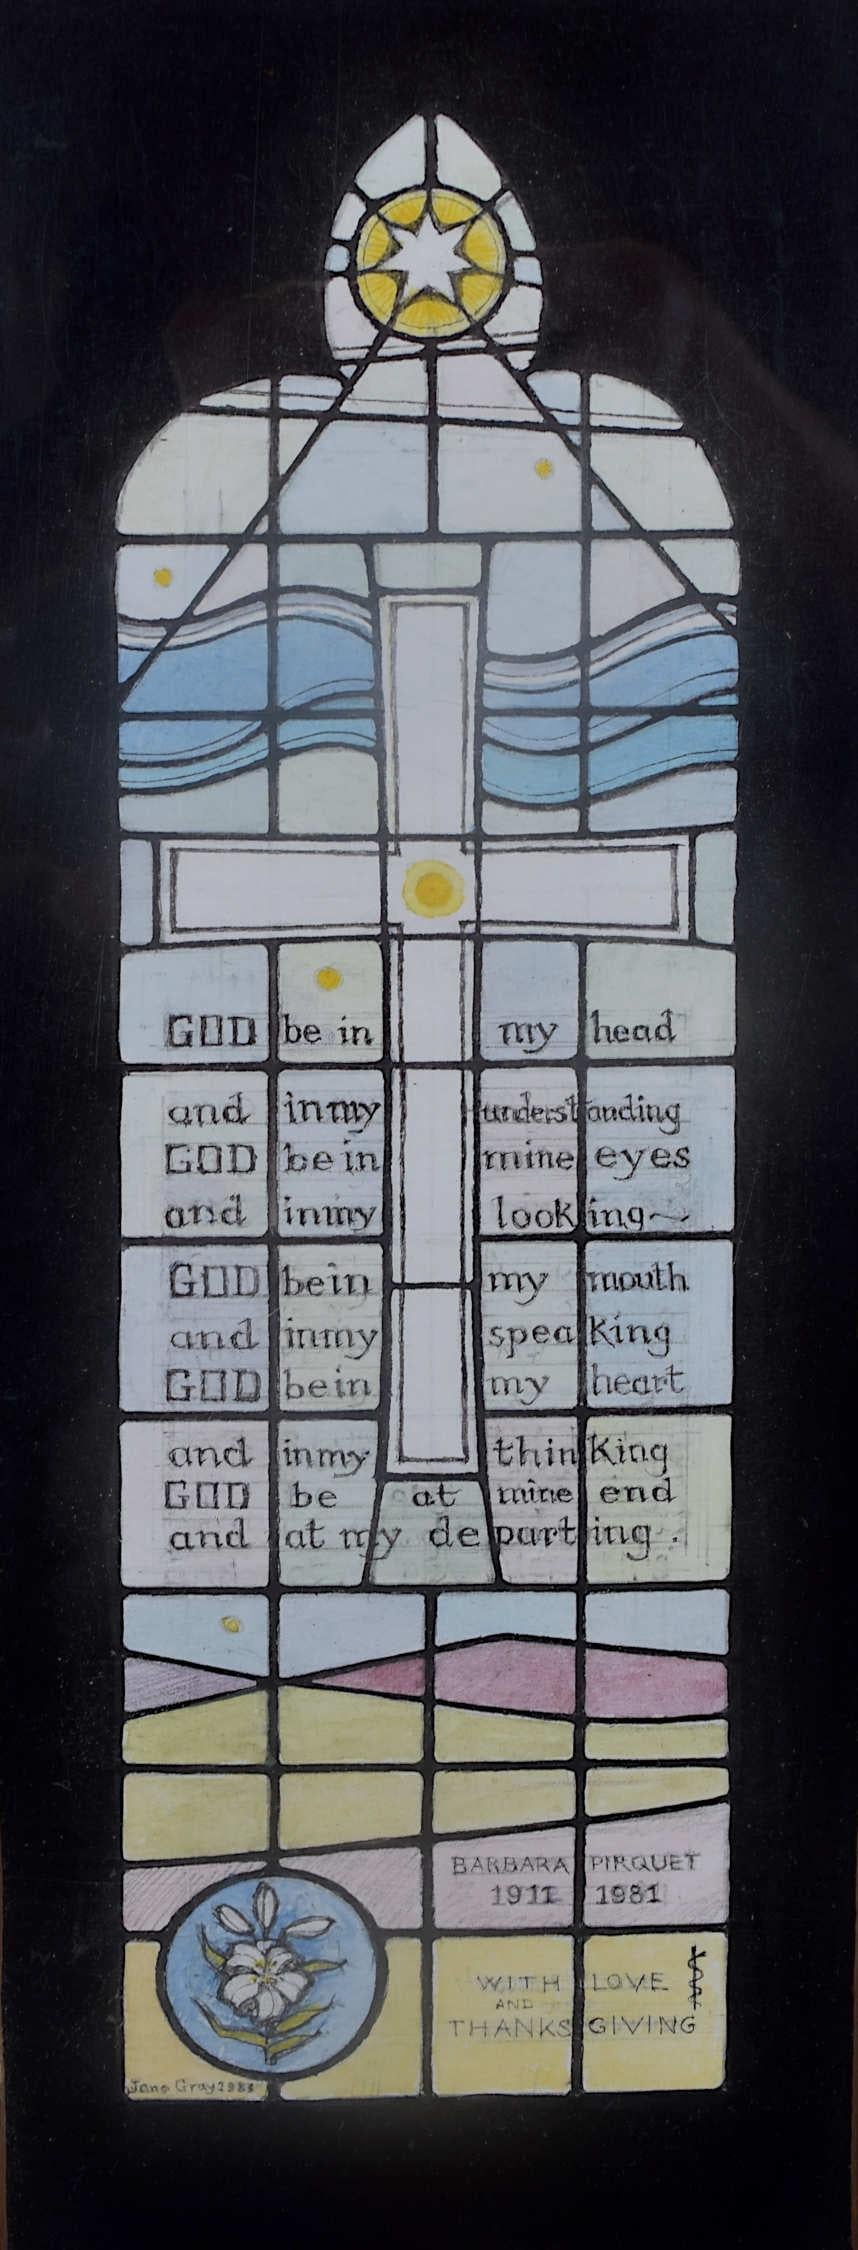 We acquired a series of watercolour stained glass designs from Jane Gray's studio. To find more scroll down to "More from this Seller" and below it click on "See all from this seller." 

Jane Gray (b.1931)
Stained Glass Design
Watercolour
21 x 7.5